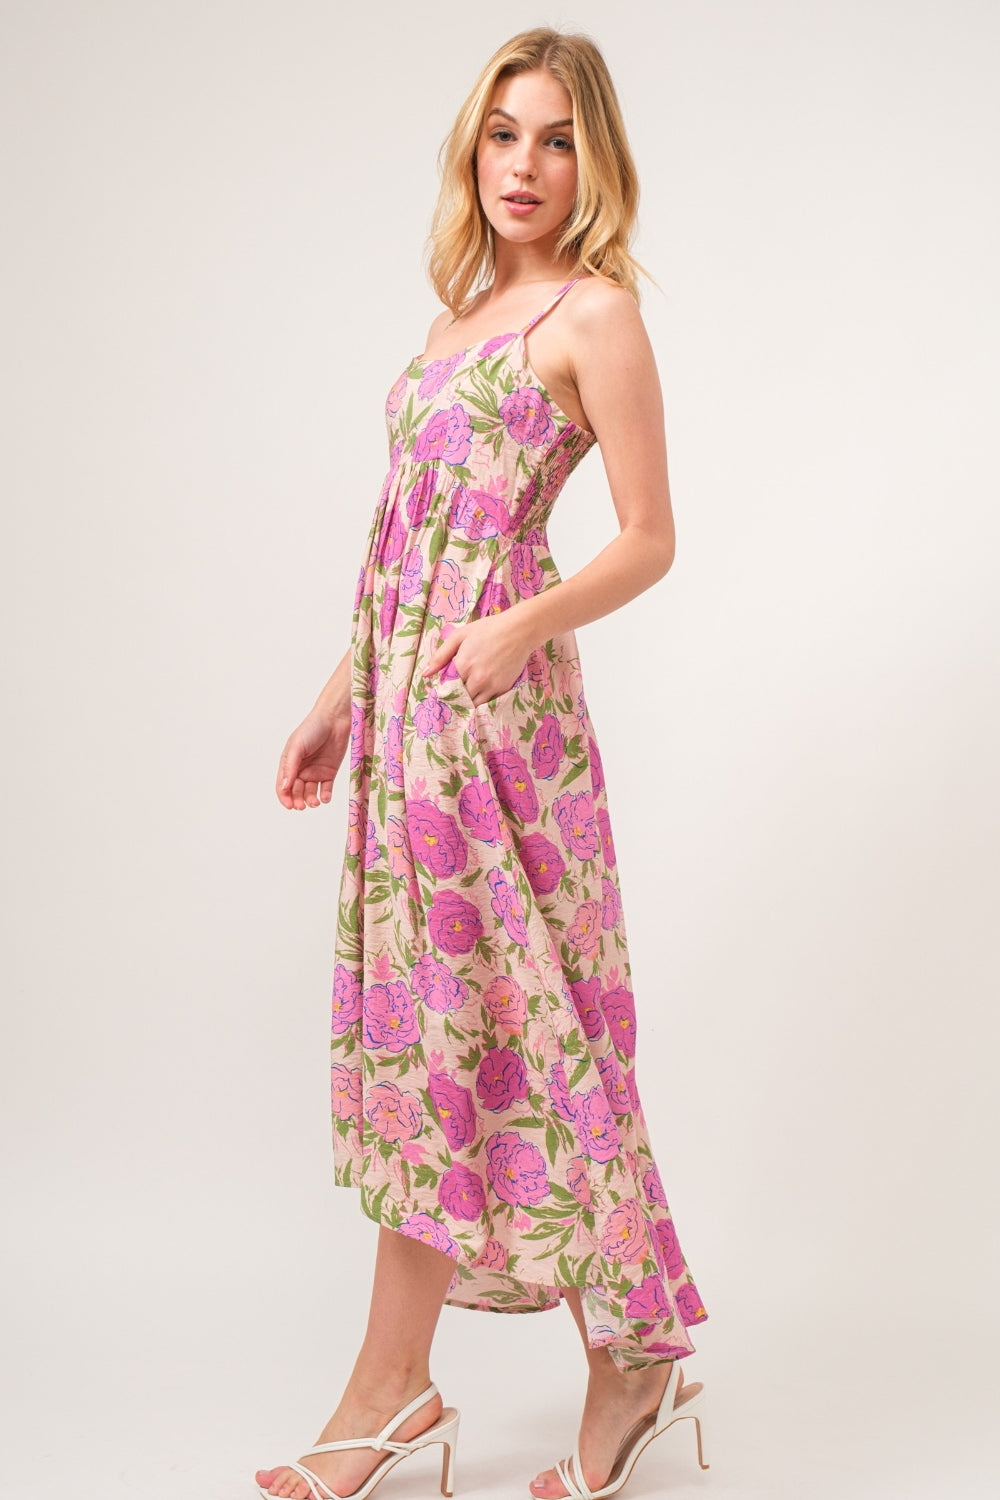 And The Why Floral Pink High-Low Hem Cami Dress